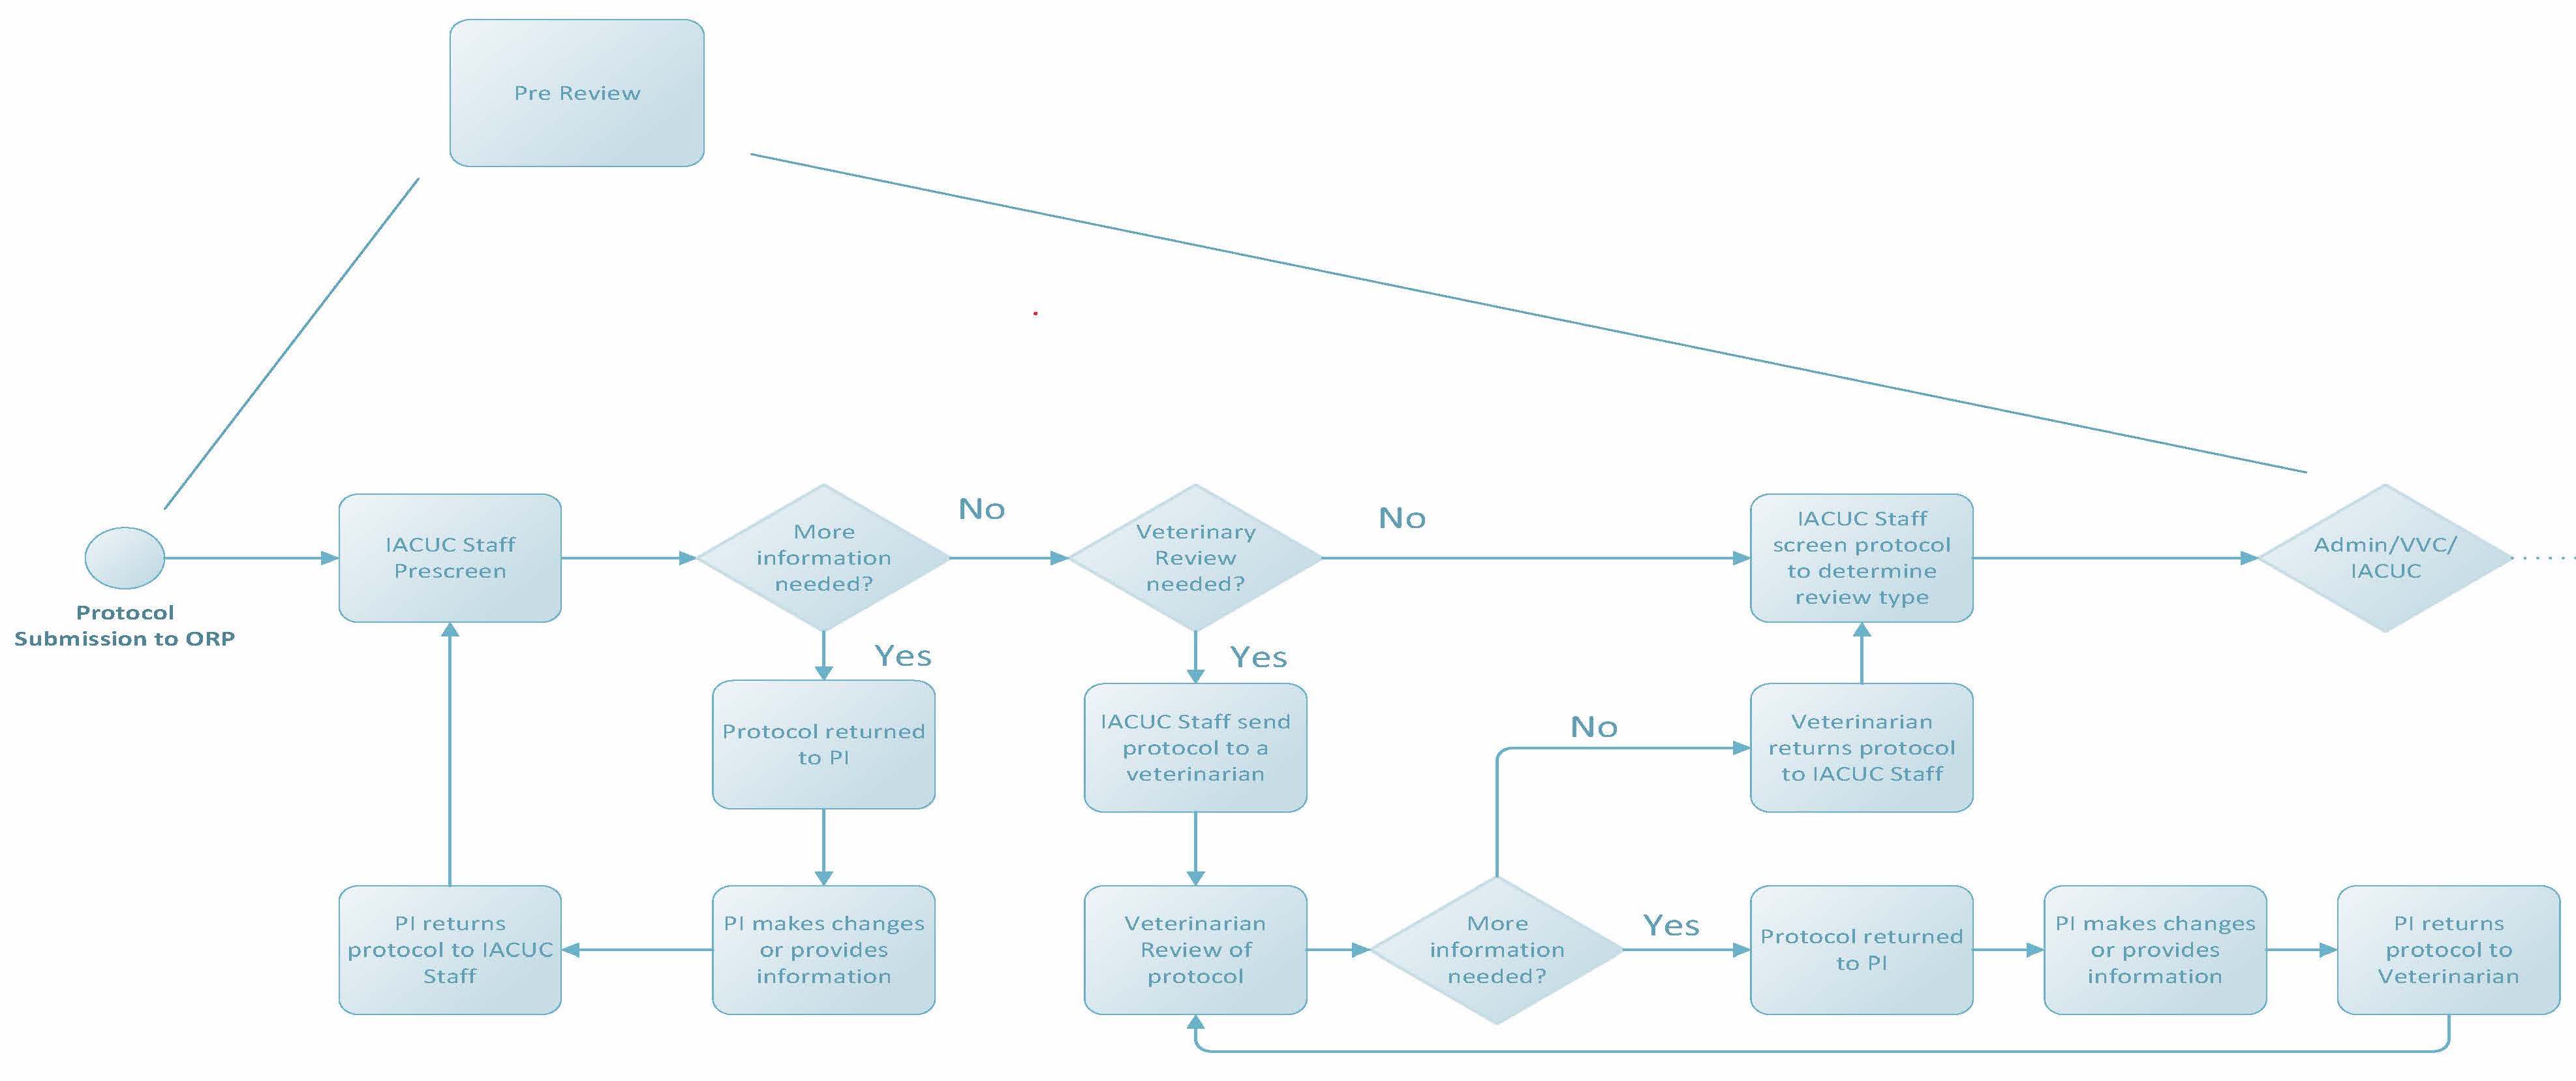 IACUC Review Process Map - Pre Review.jpg